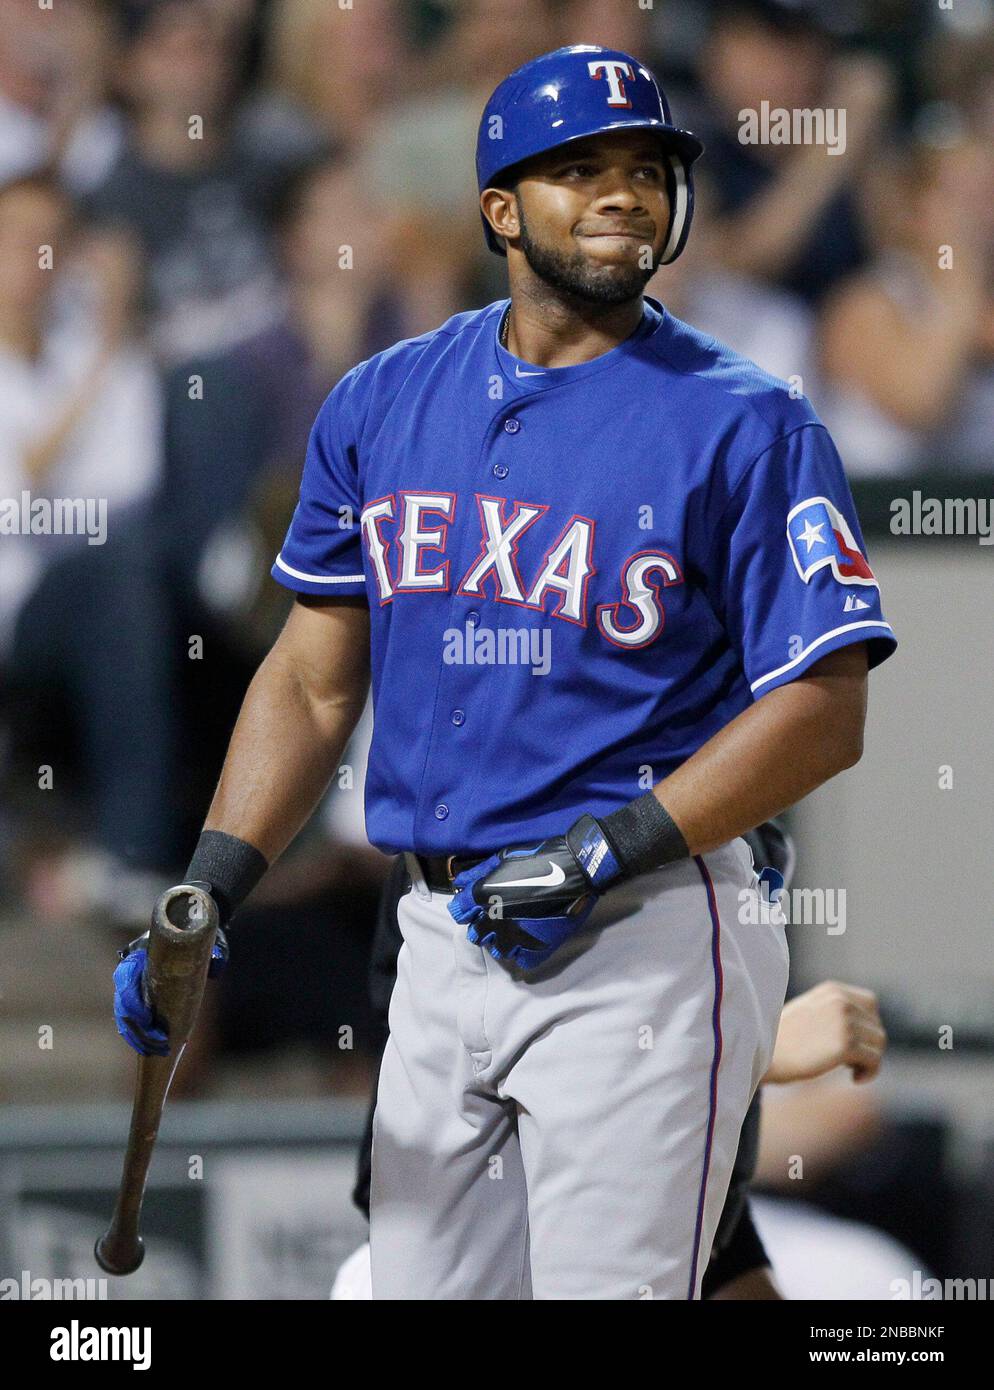 Photo: Rangers Elvis Andrus reacts after striking out during game